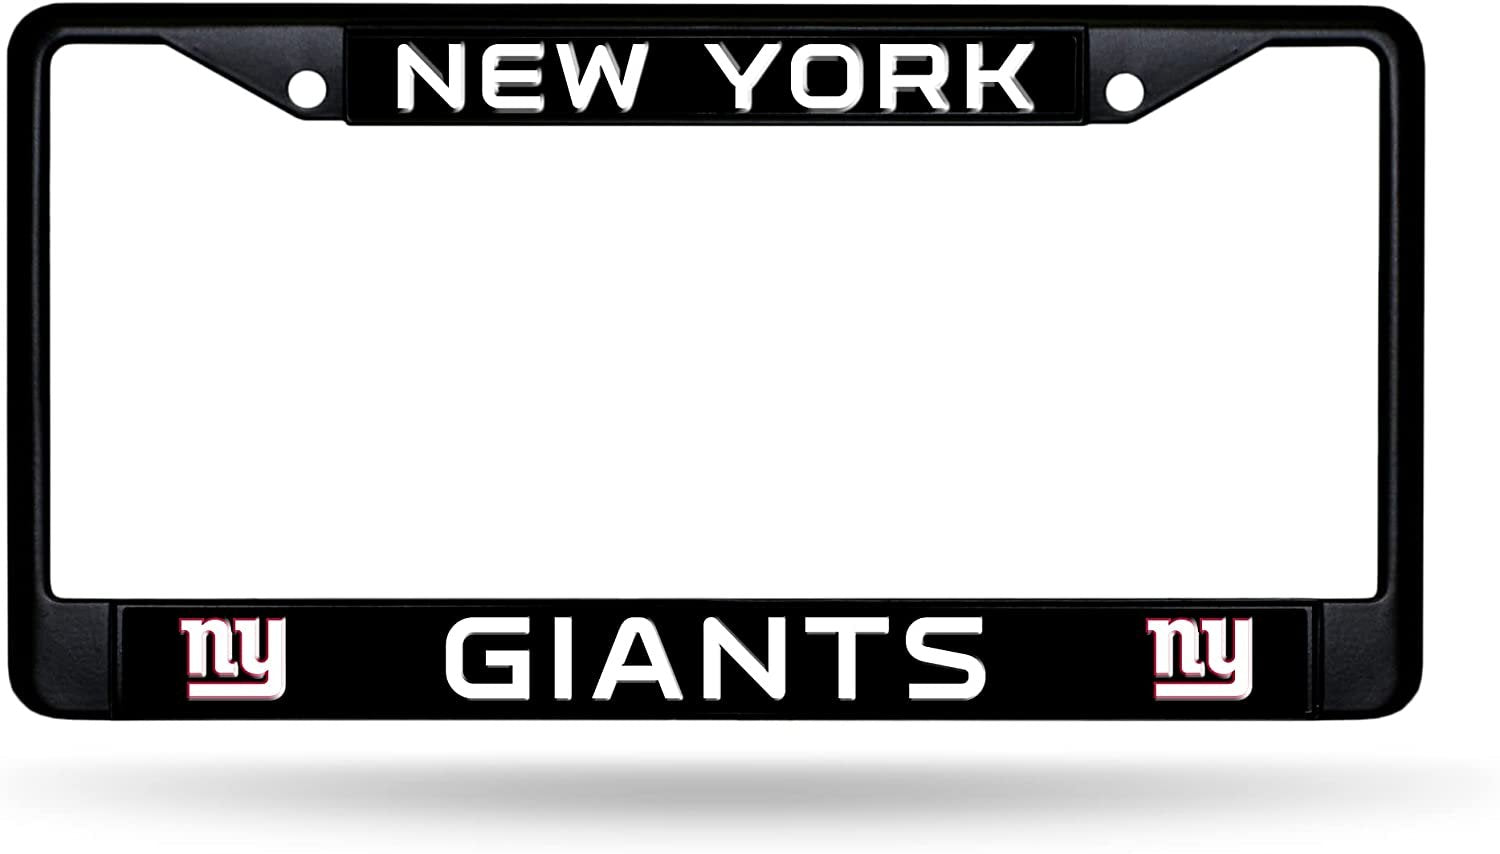 New York Giants Black Metal License Plate Frame Chrome Tag Cover 6x12 Inch